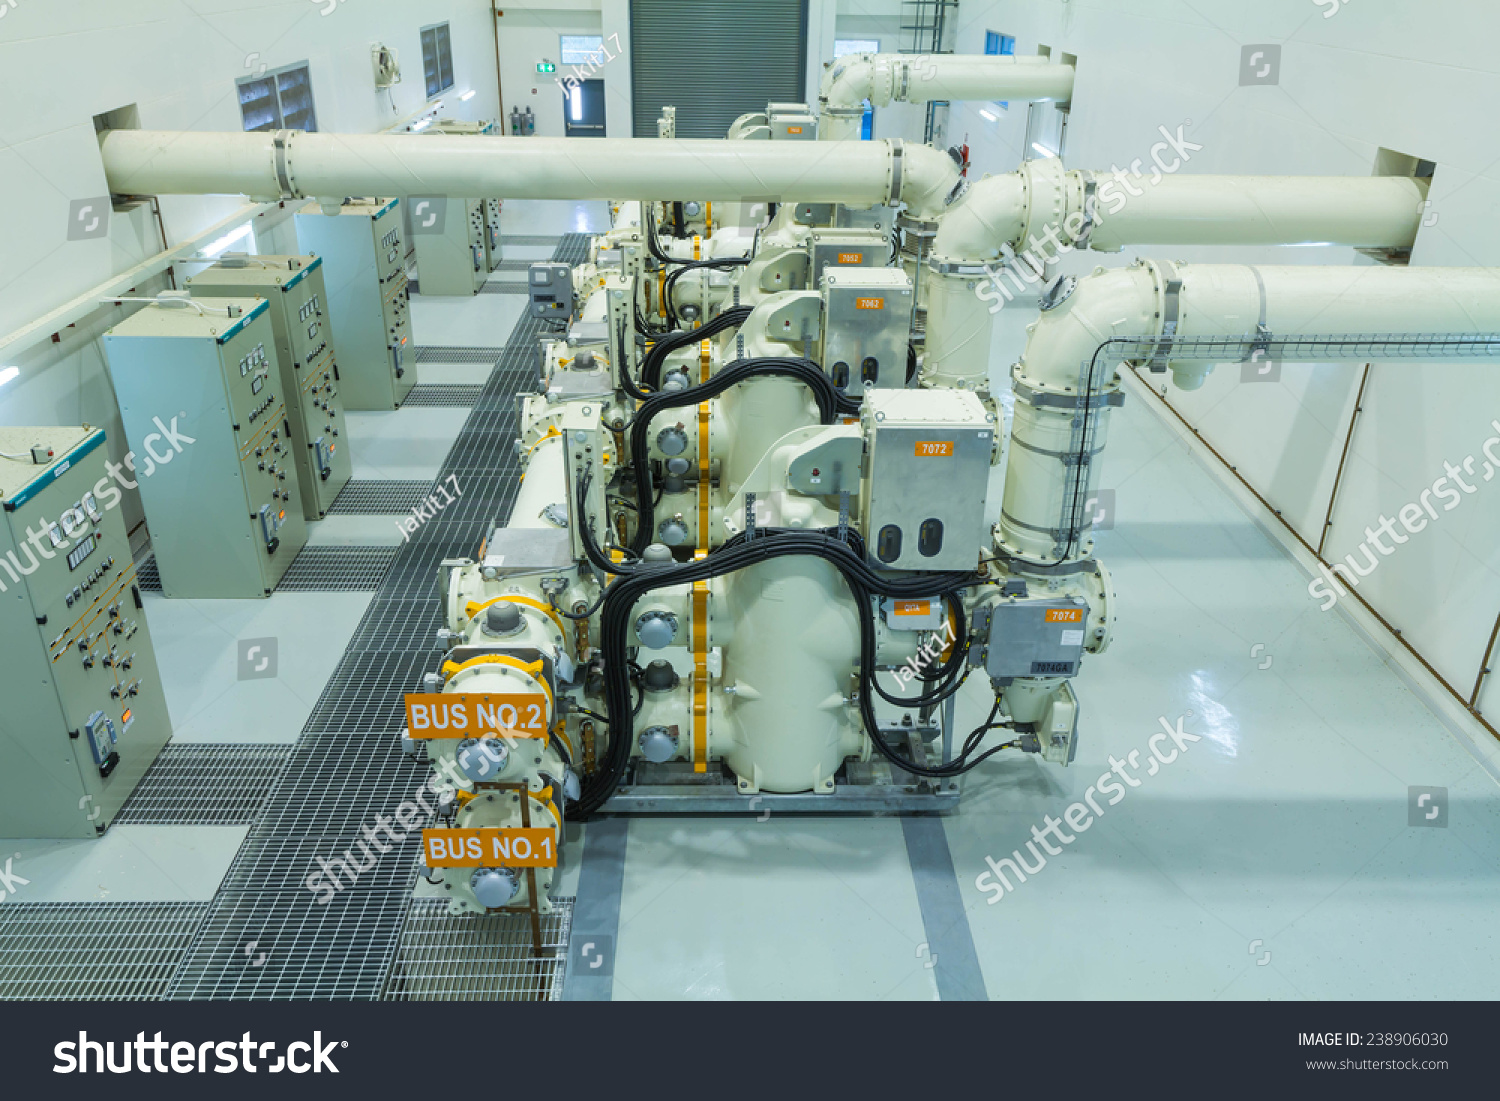 High Voltage Electric Power 500 Kv Gas Insulated Switchgear In Control Building Gis Stock